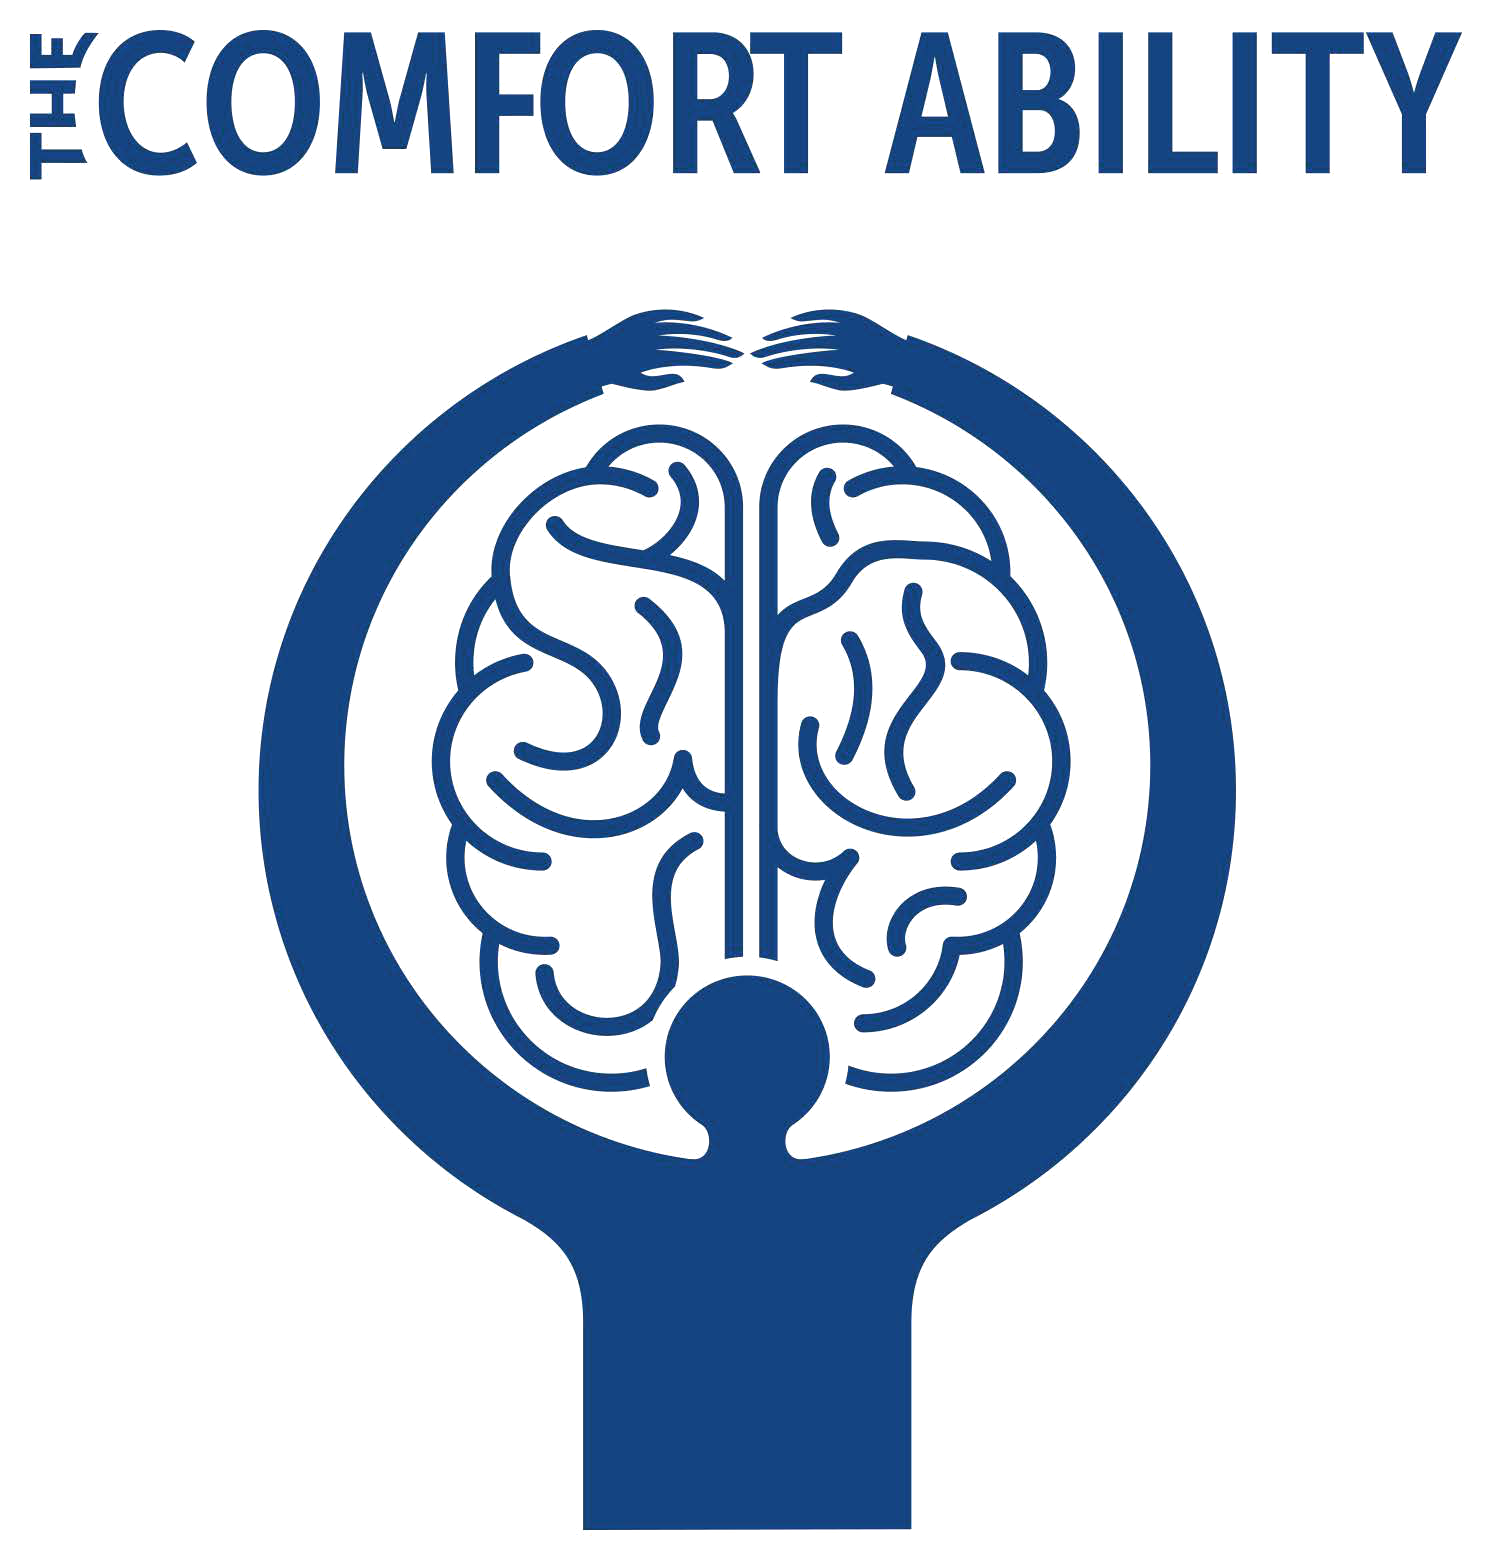 The Comfort Ability logo